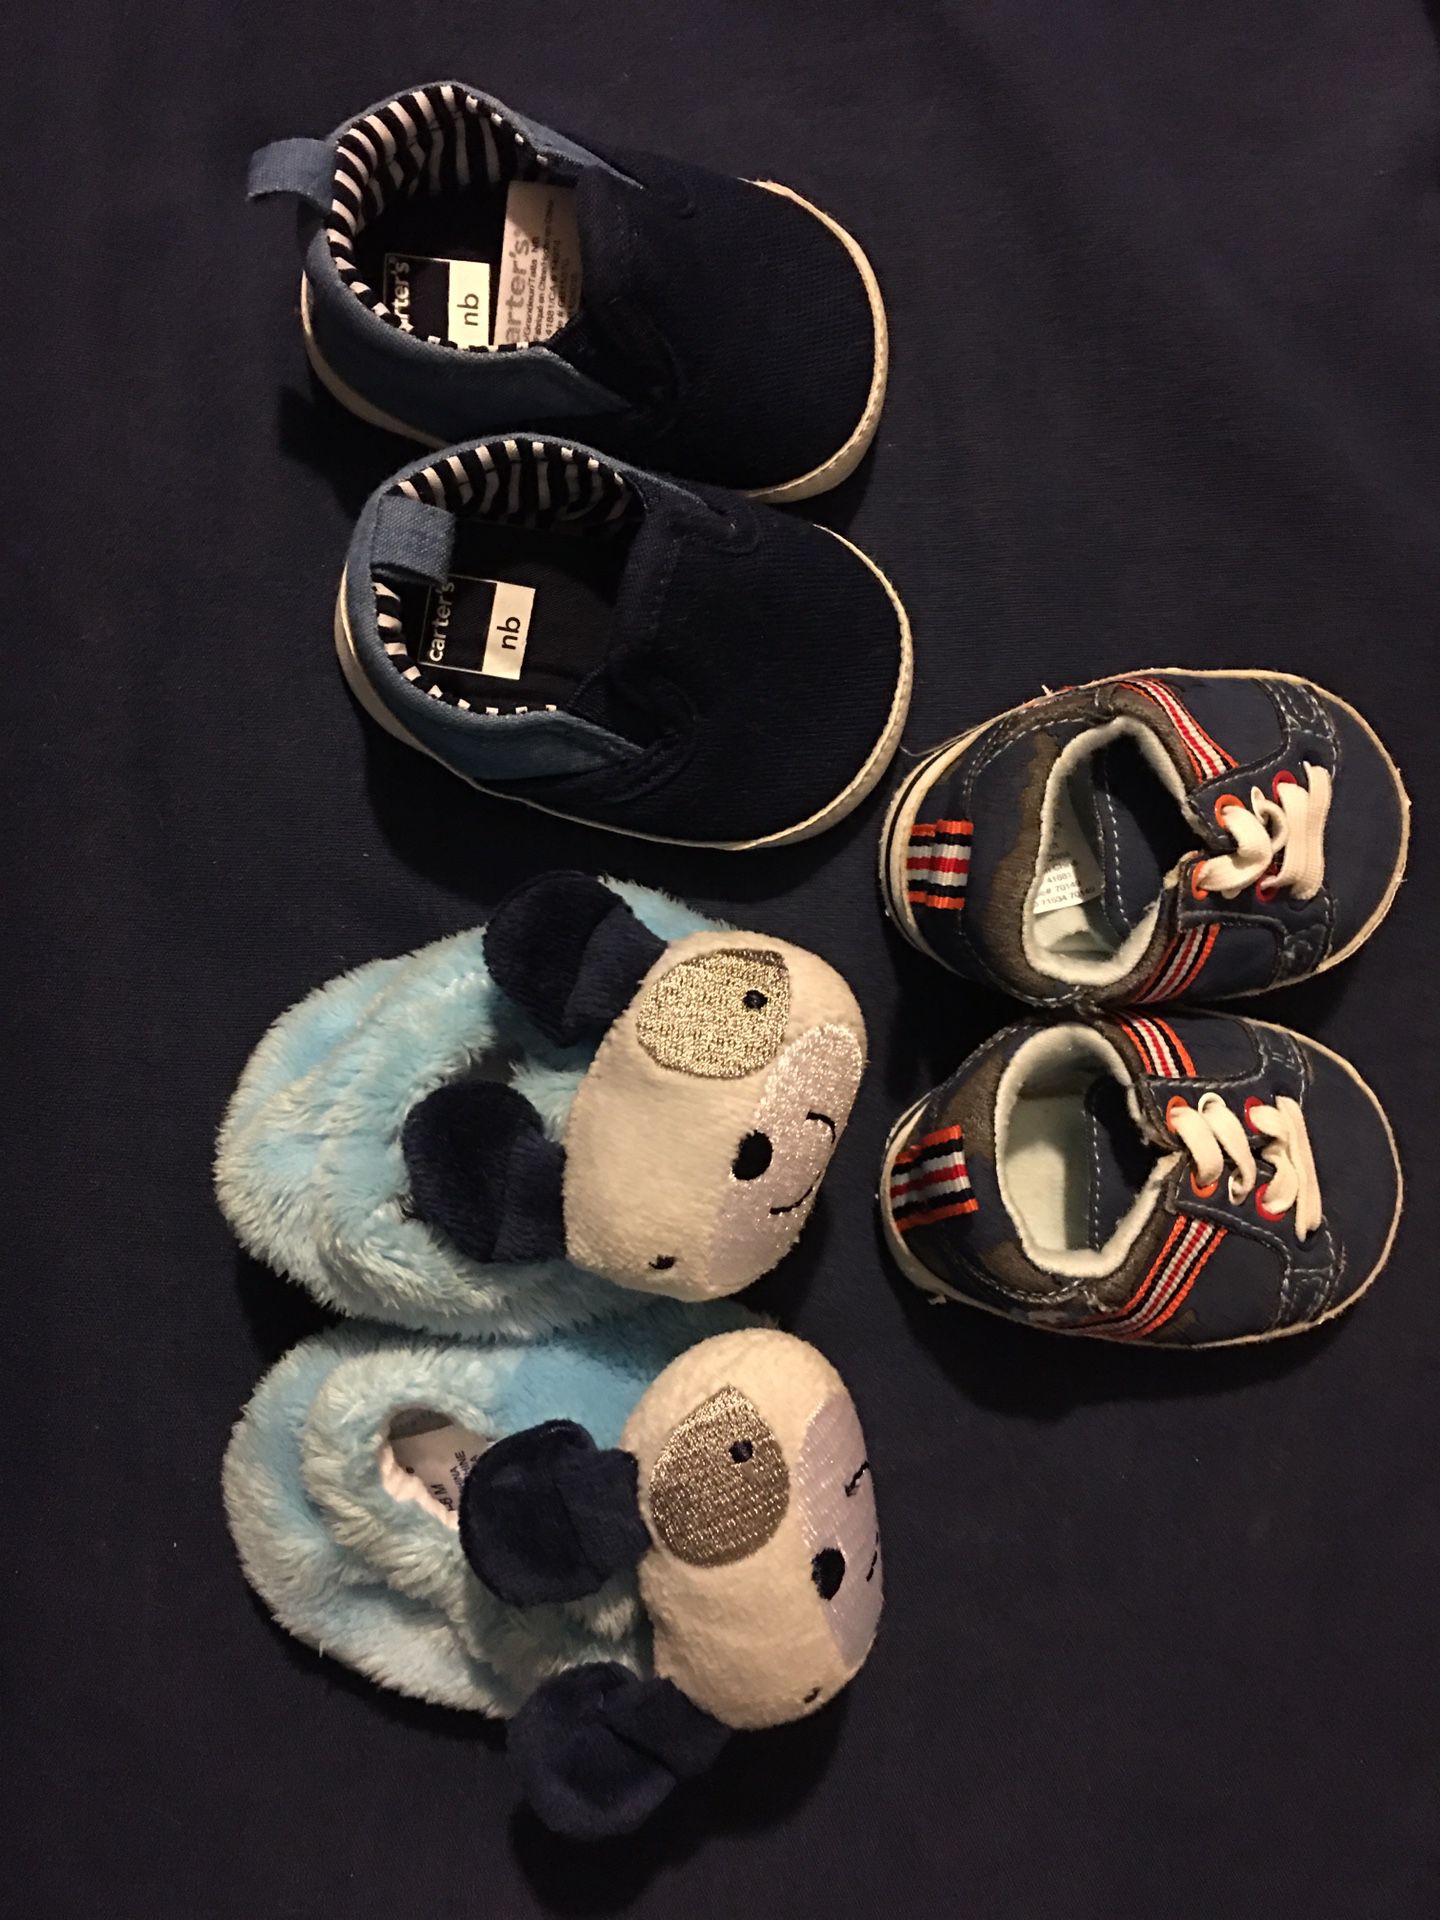 Baby shoes $1